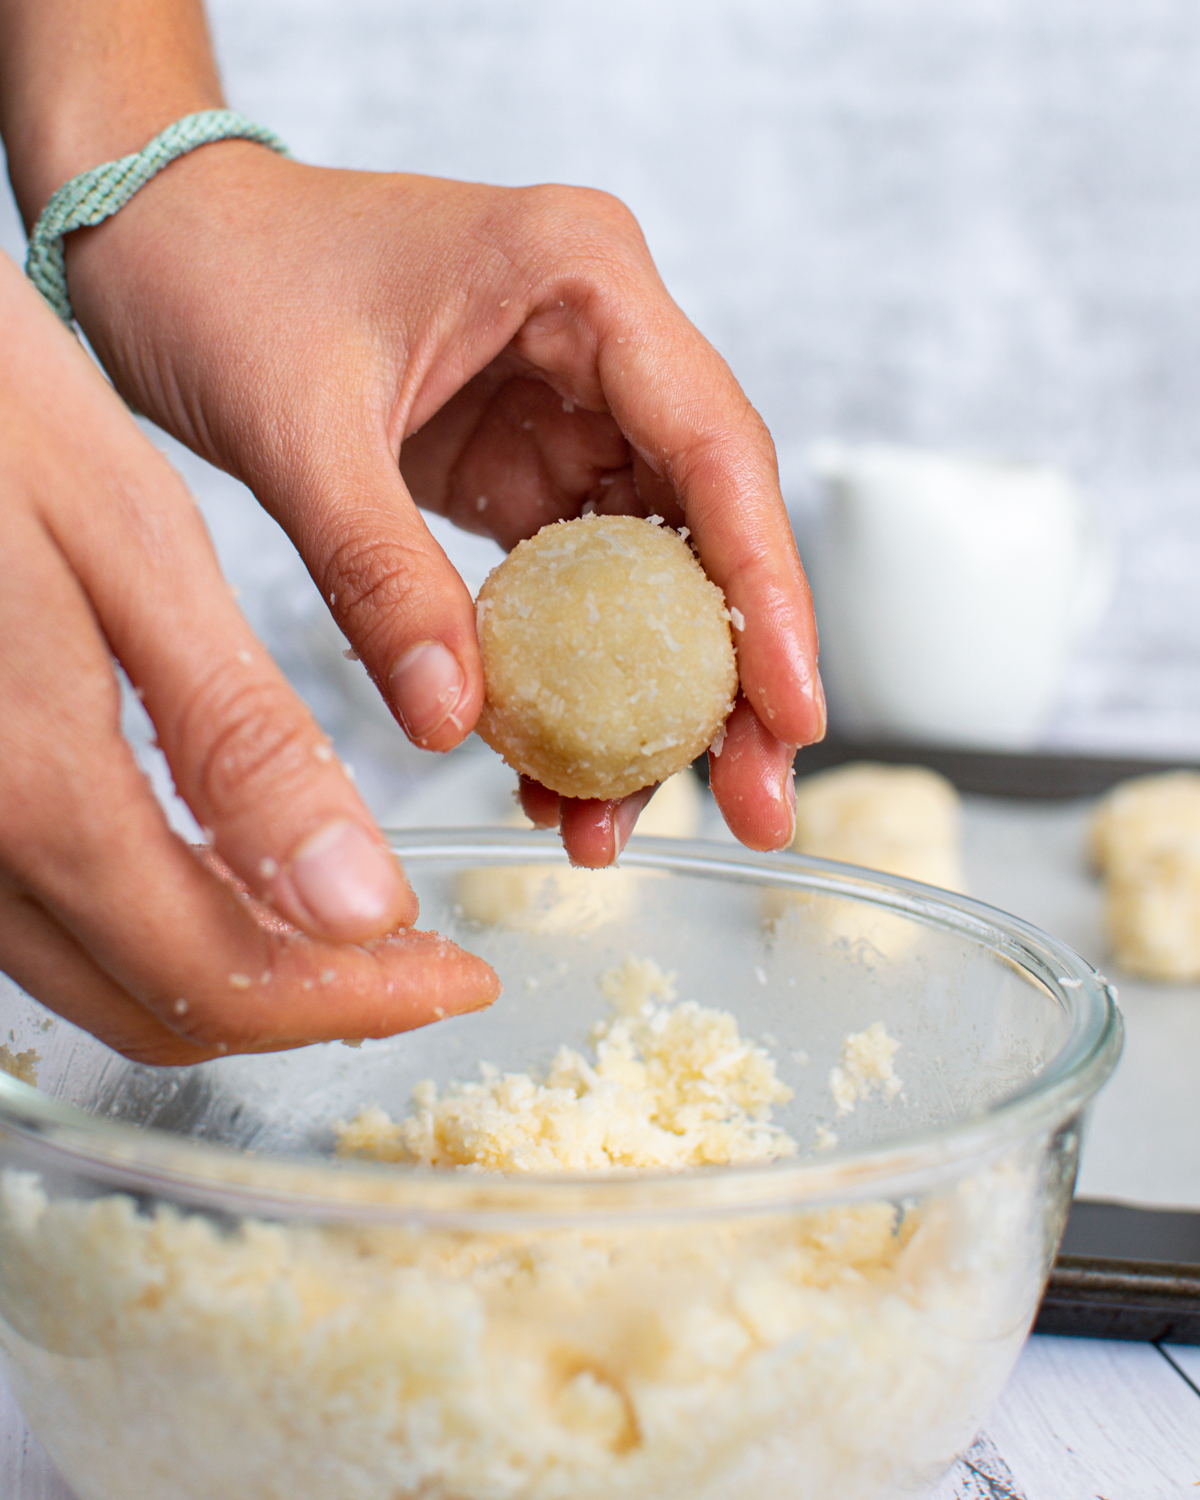 Picture of dough in a medium glass bowl with hands rolling dough into a ball.